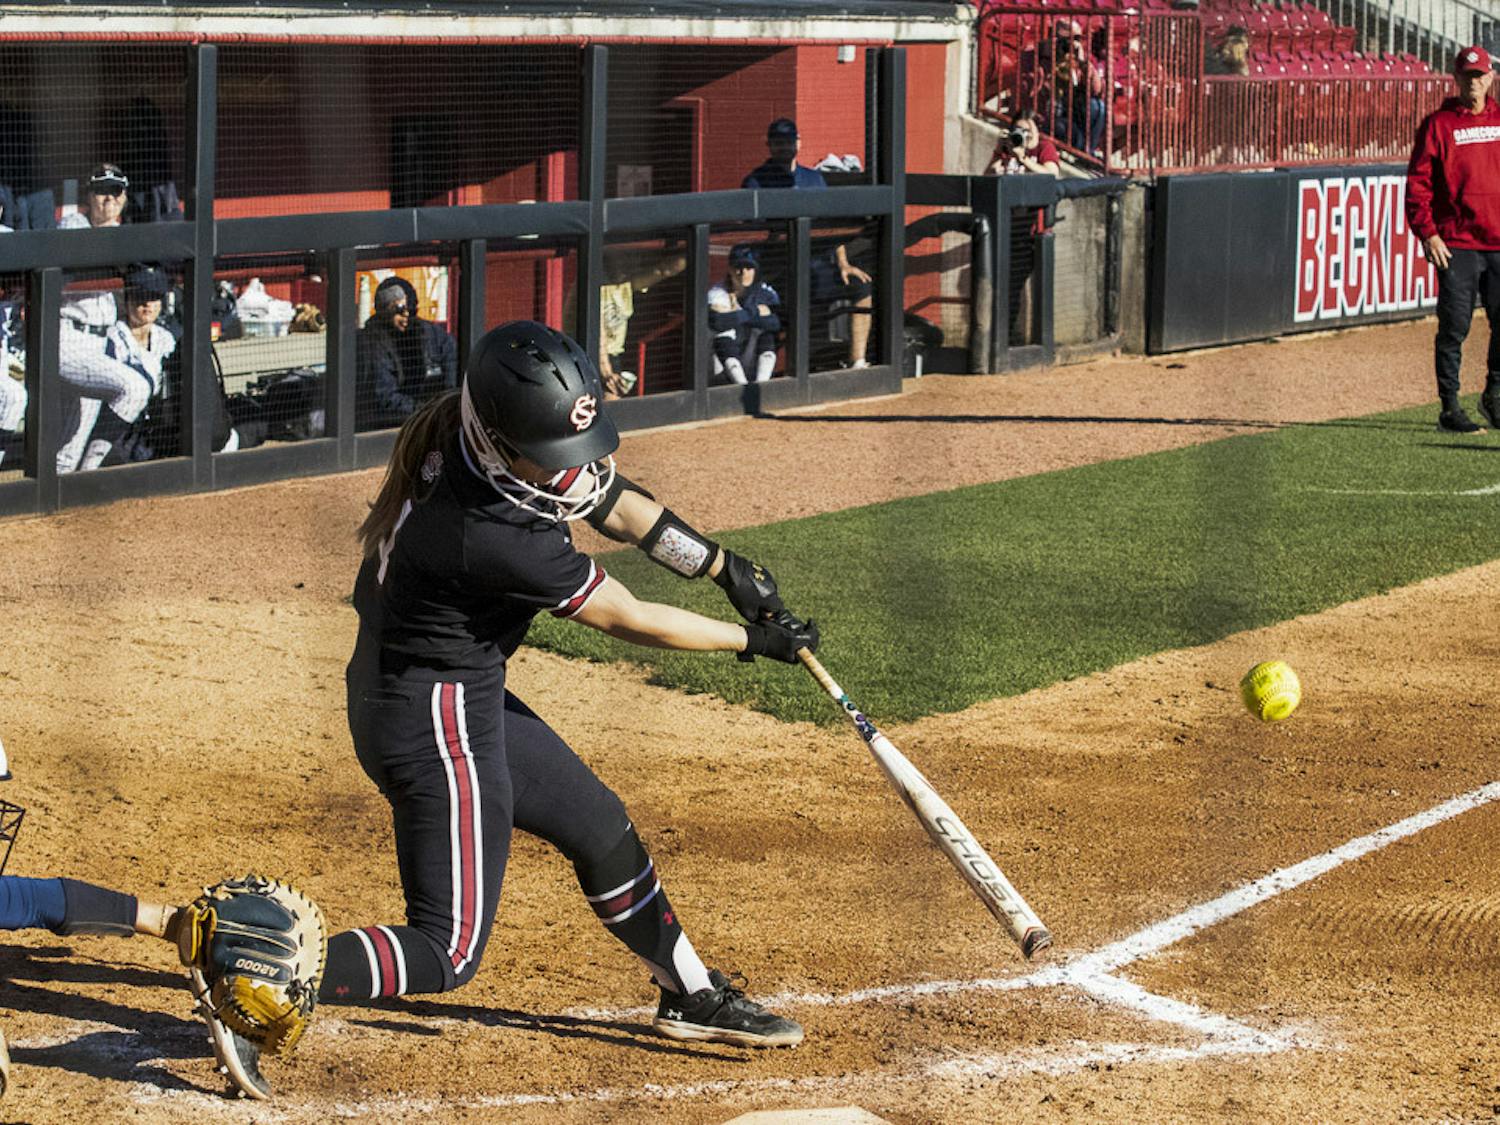 Sophomore infielder Brooke Blankenship swings for the ball during the match against George Washington University at Beckham Field on Feb. 18, 2023. The Gamecocks went on to win the game 7-1. 